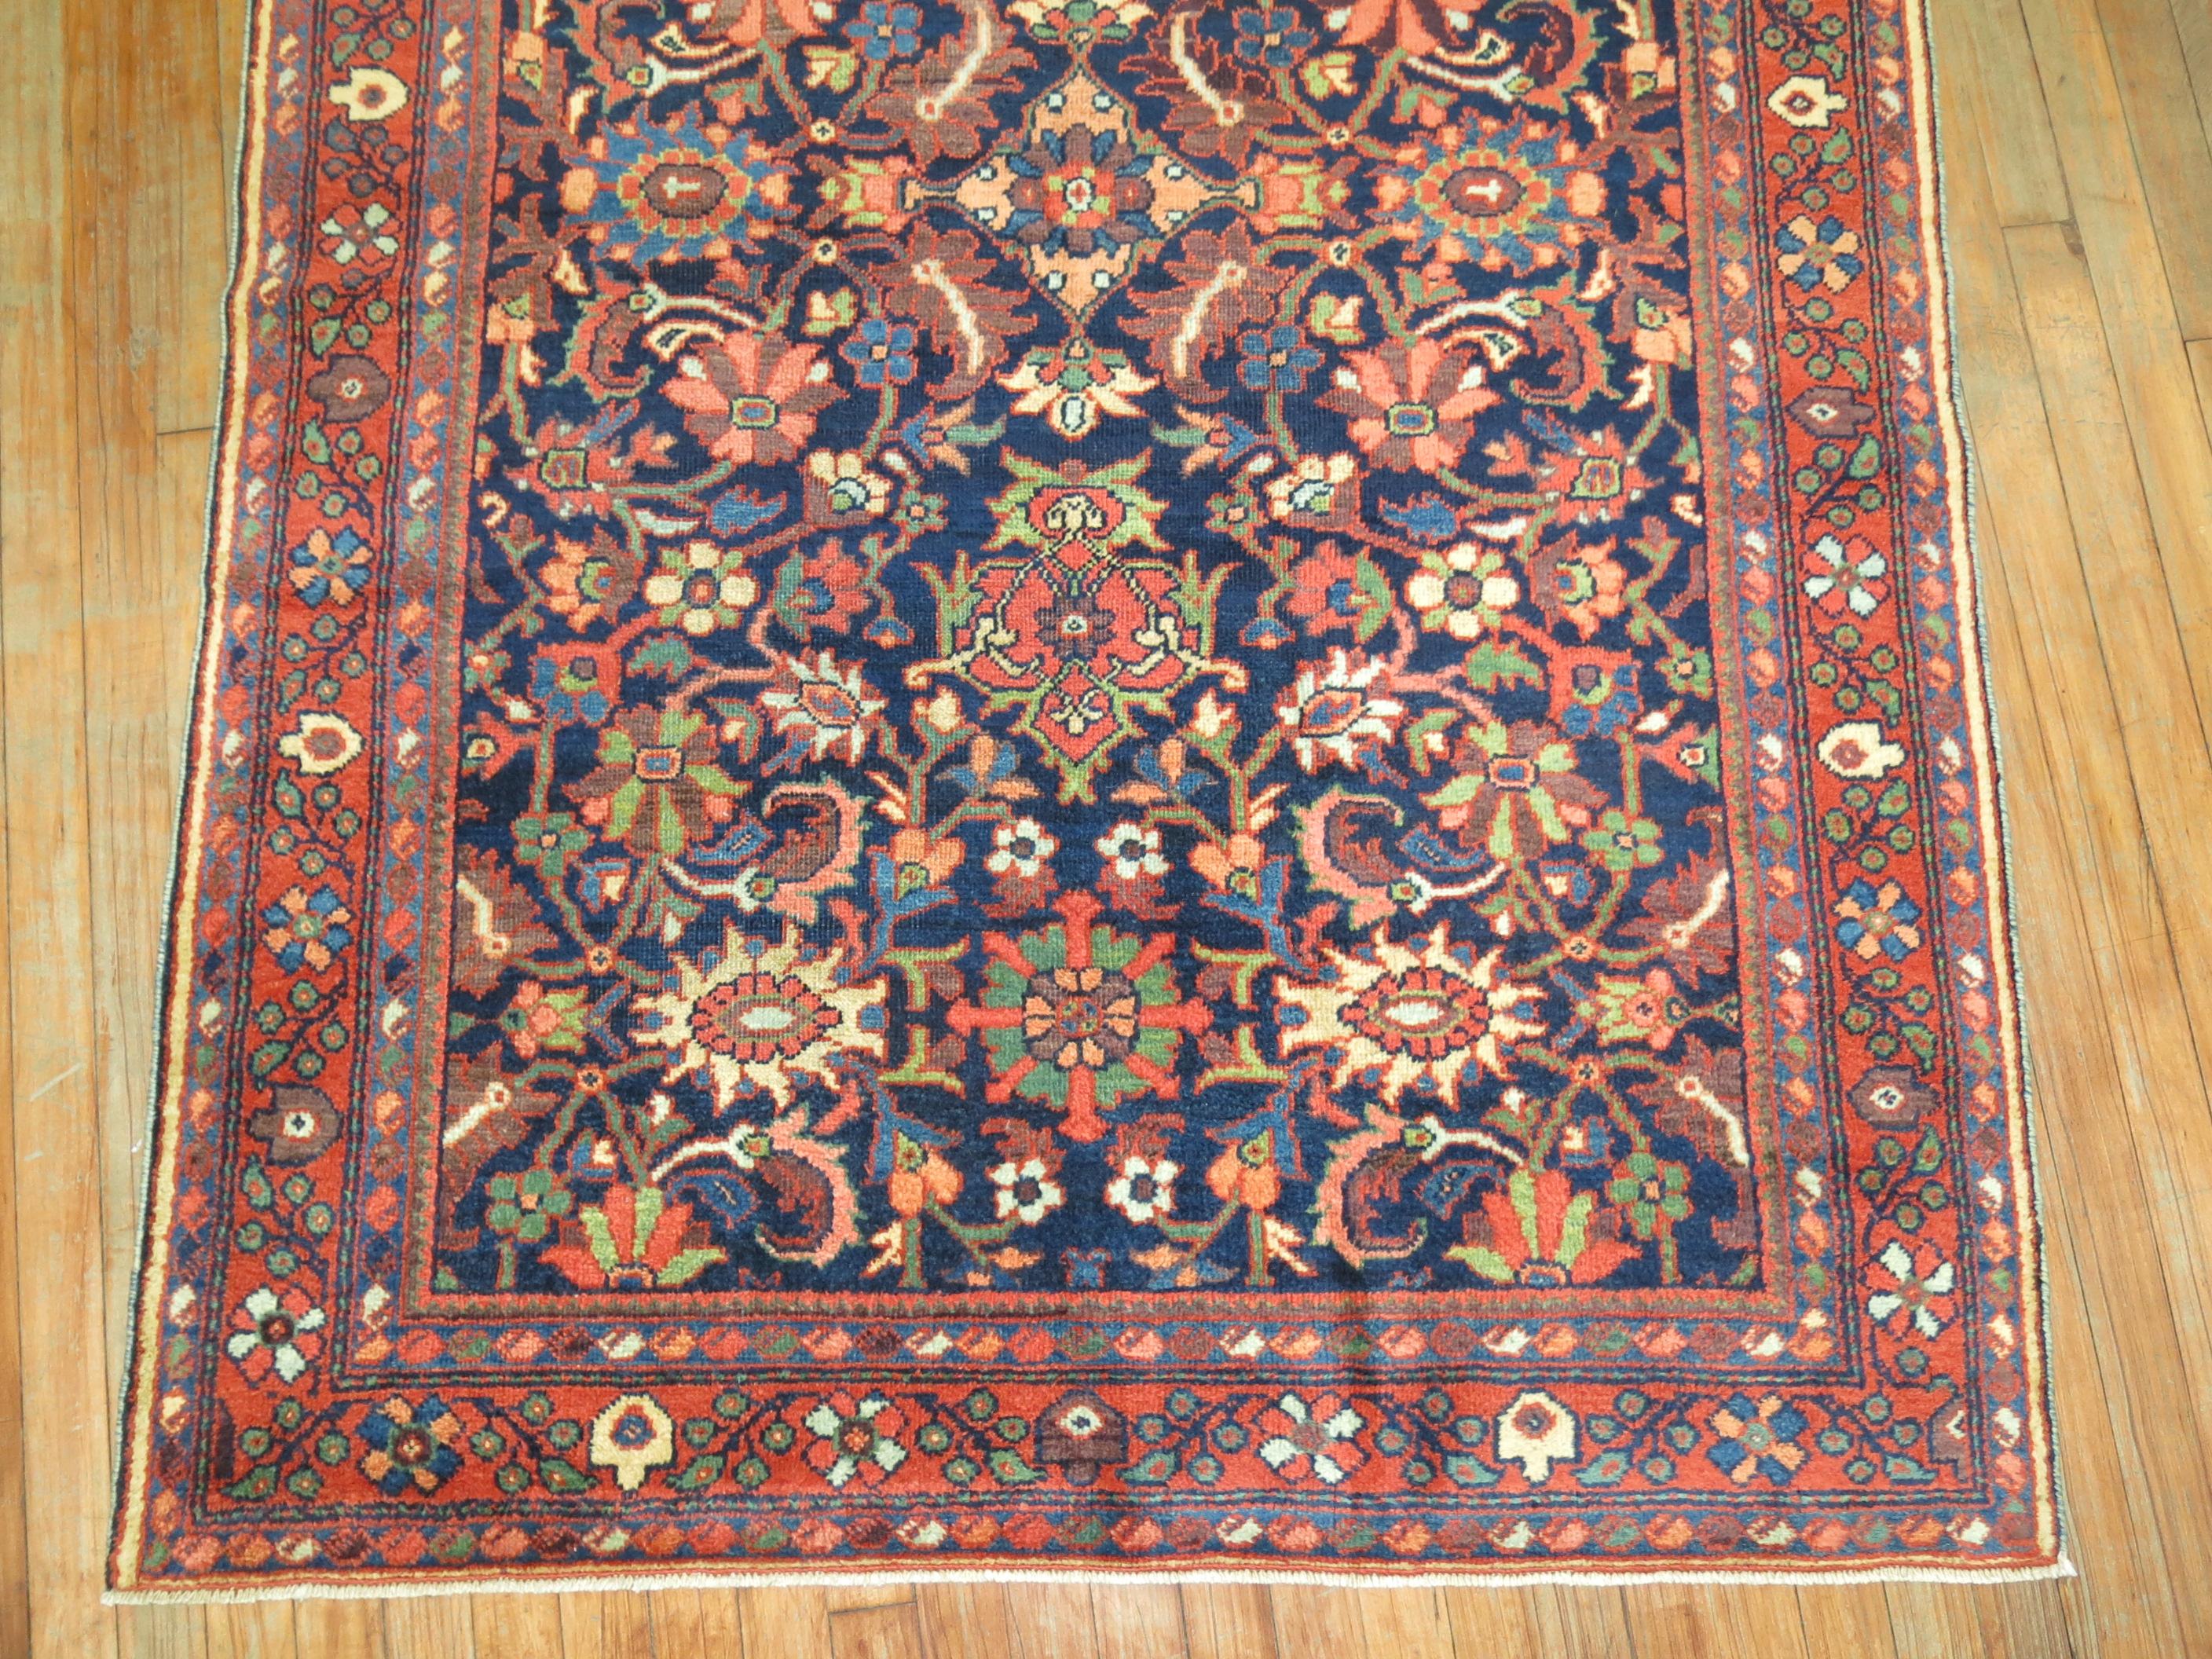 Scatter or intermediate size Persian Mahal rug with a blue field and orangey-red border.

Mahal Persian carpets from the 19th century and turn of the 20th century have become one of the most desirable among Persian village weavings, as they appeal